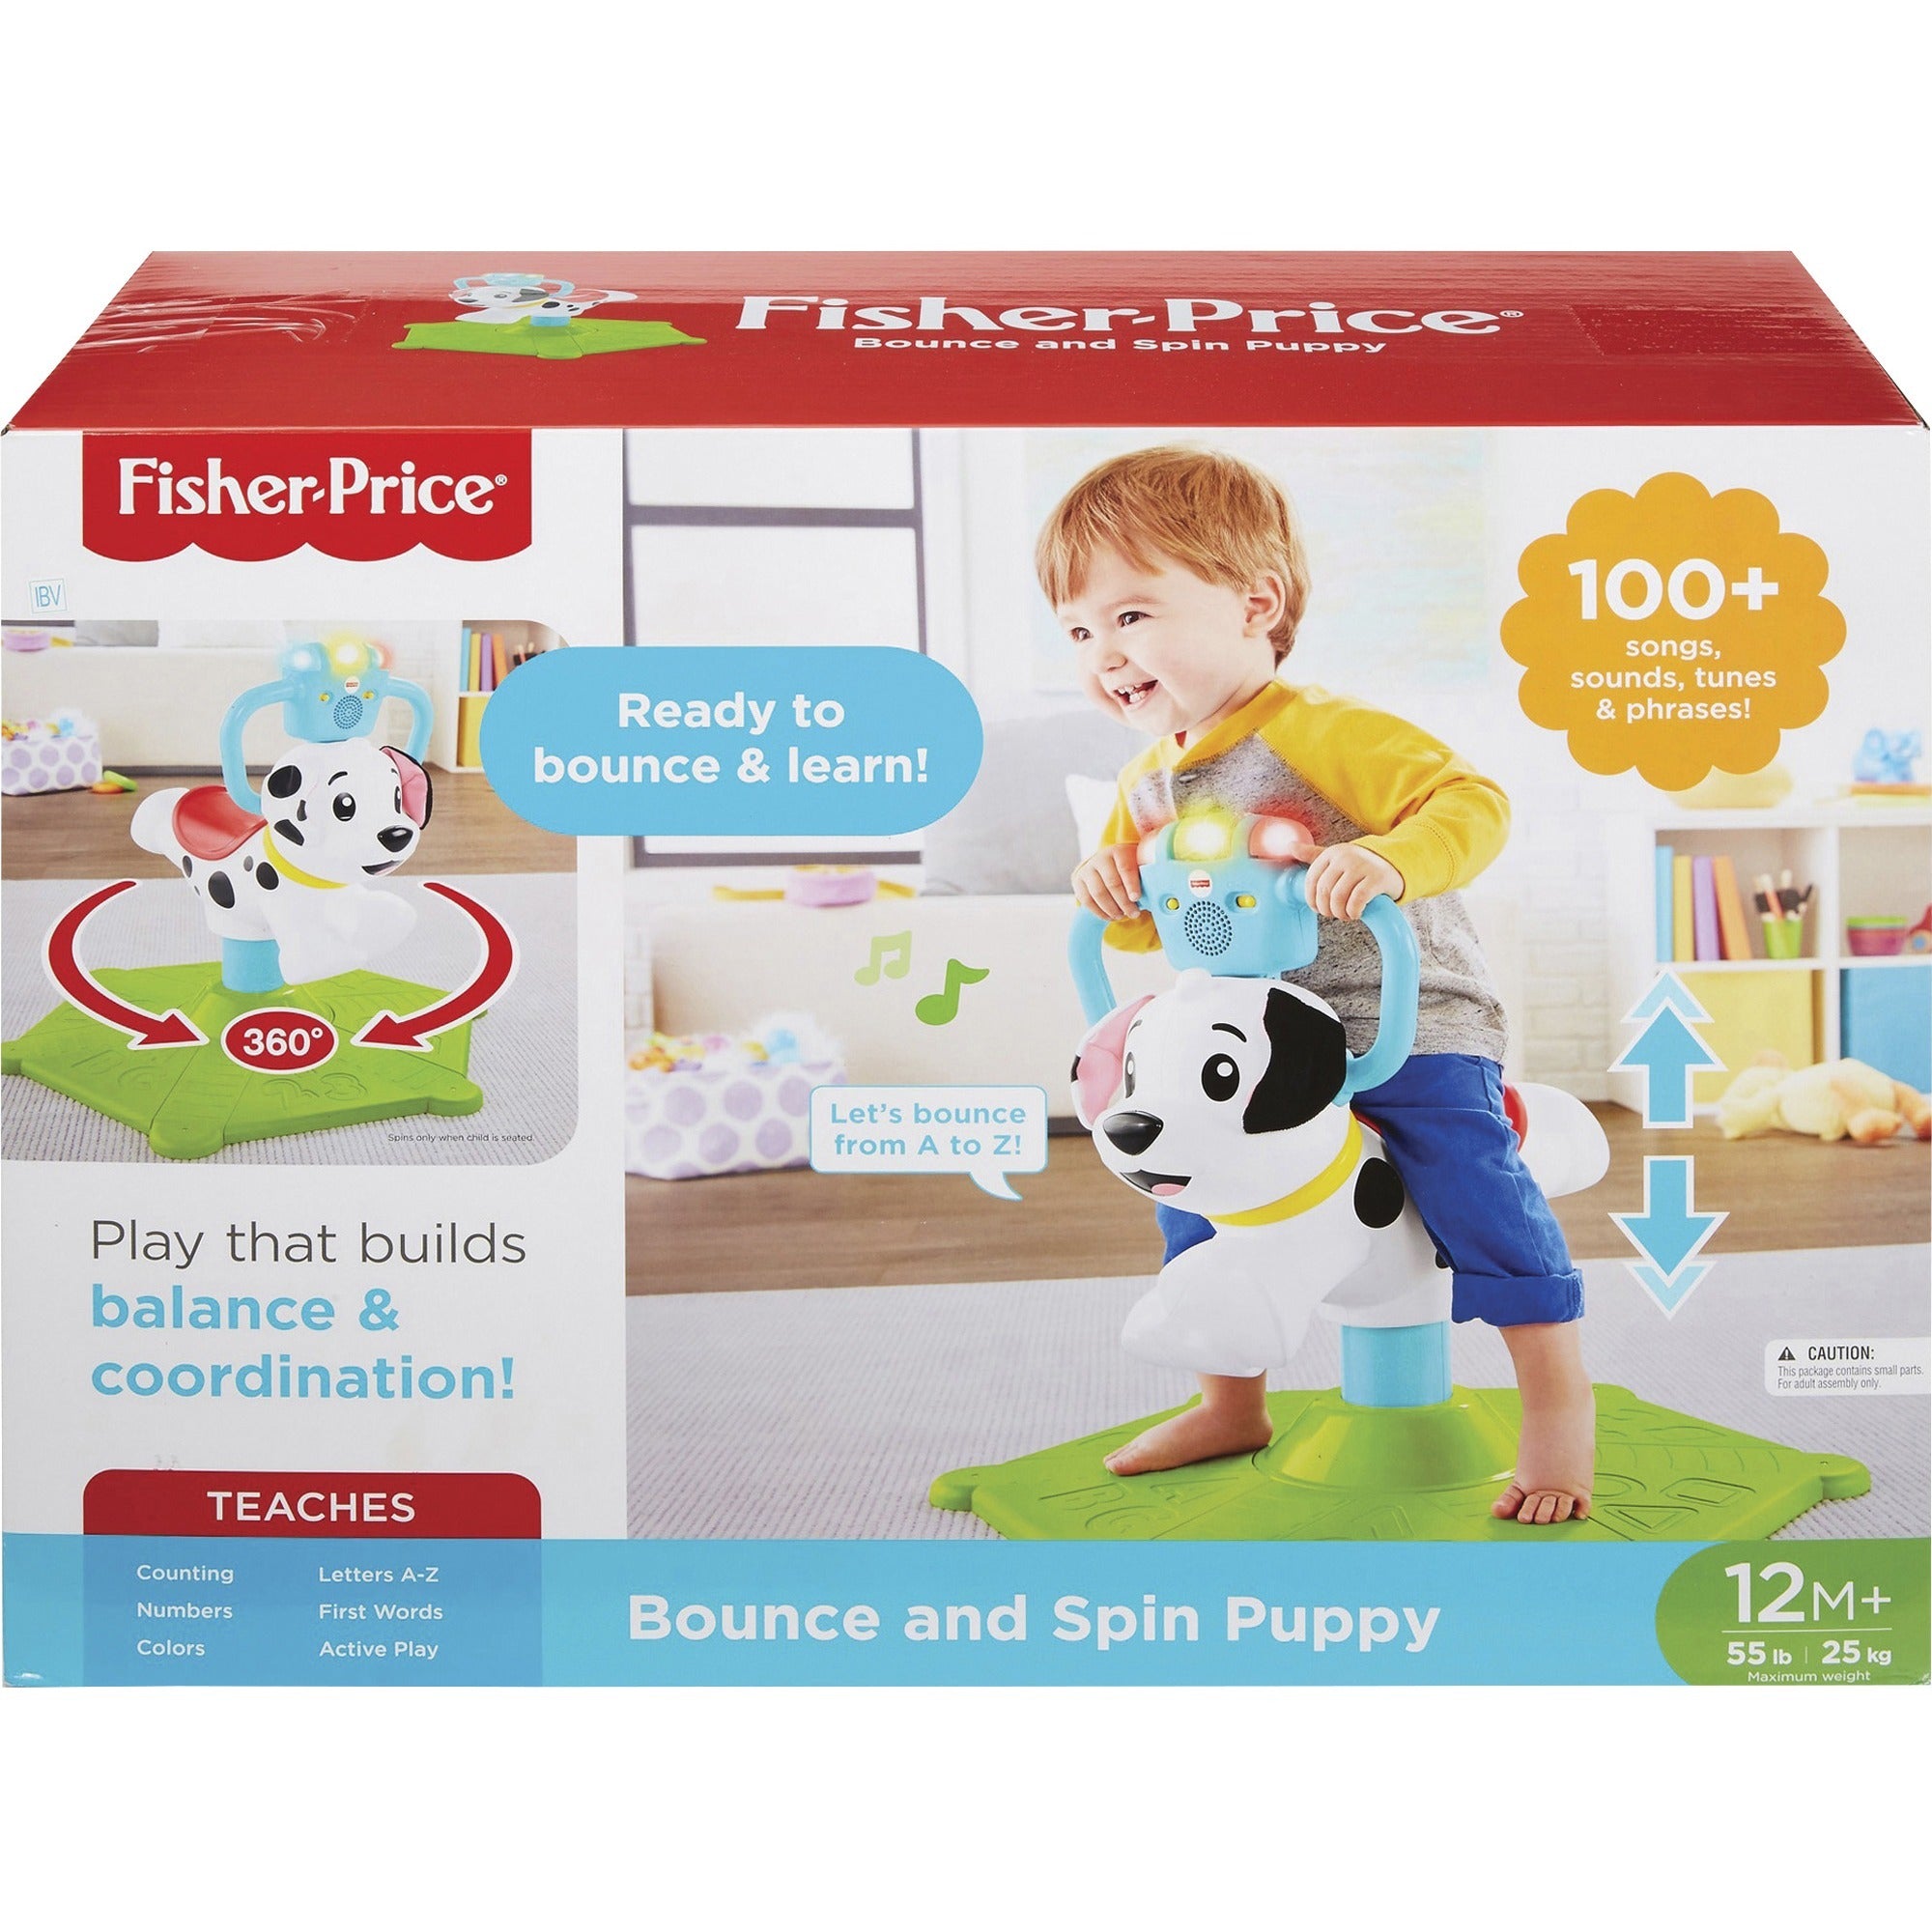 fisher-price-bounce-&-spin-puppy-55-lb_fipgcw11 - 1